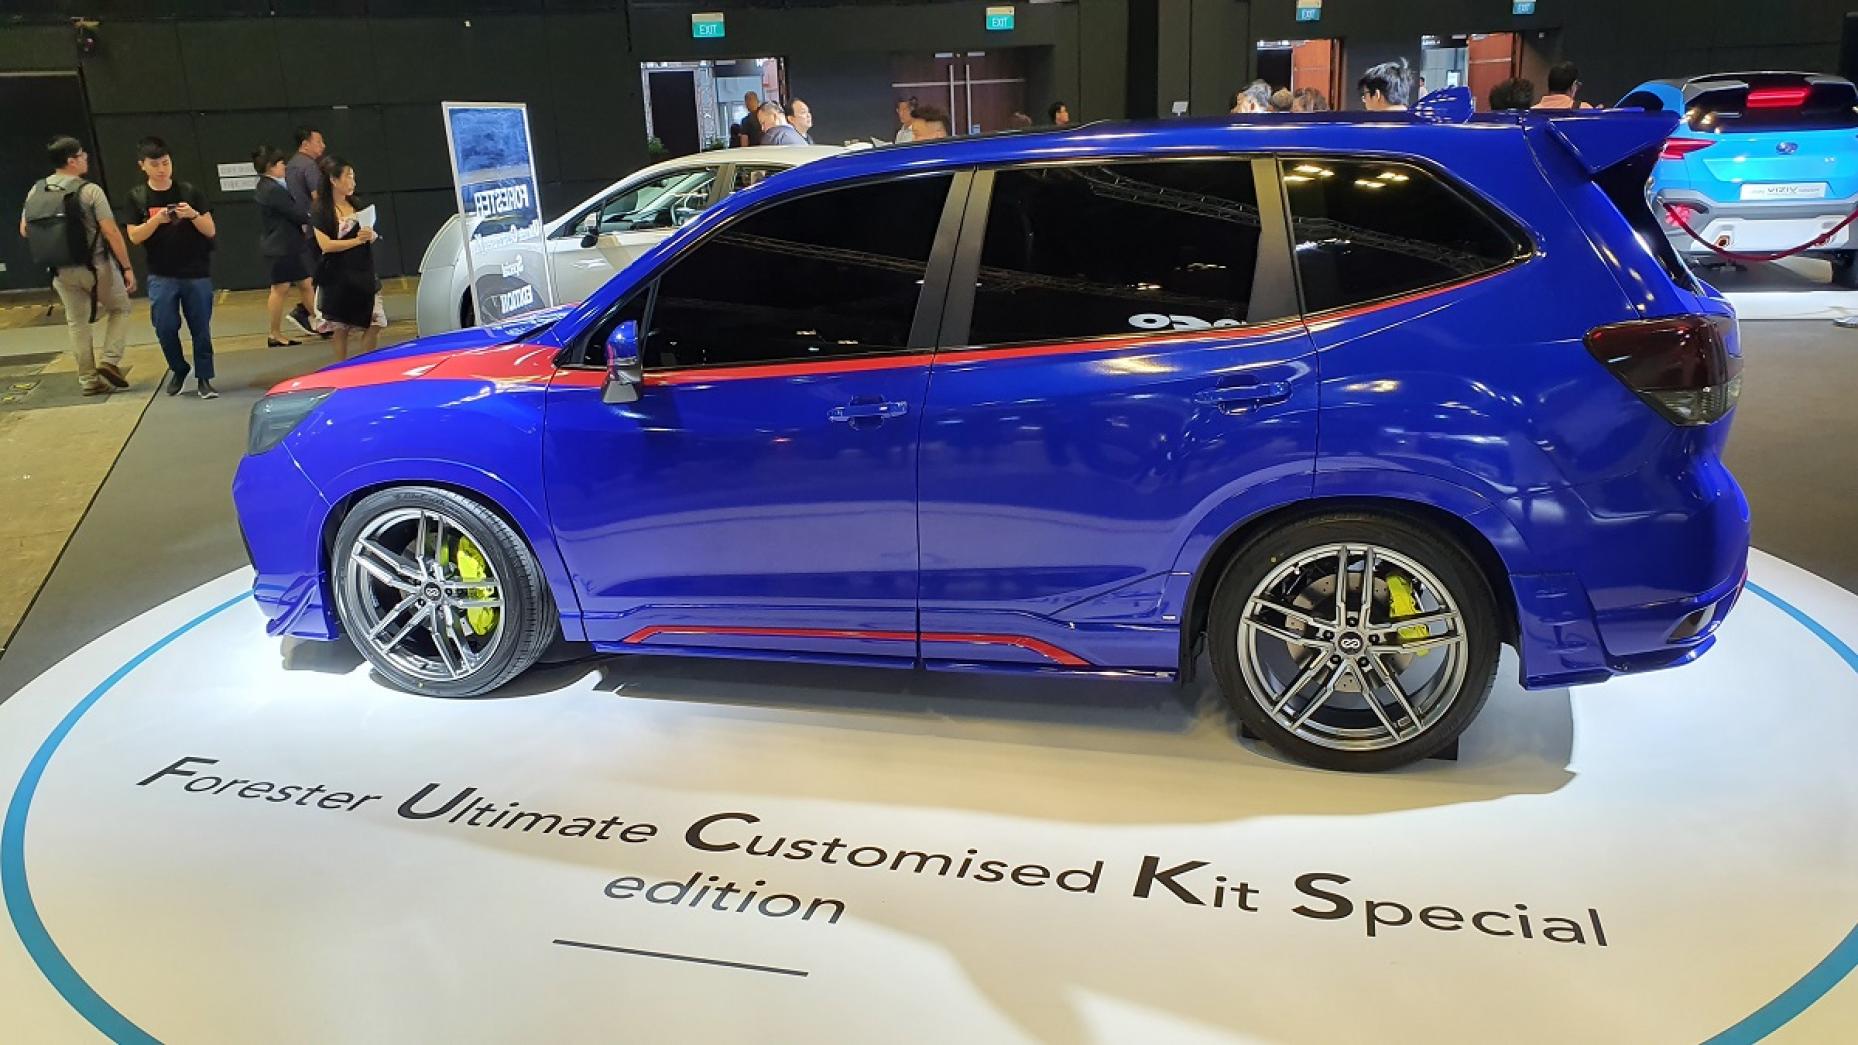 6. Subaru Forester Ultimate Customised Kit Special